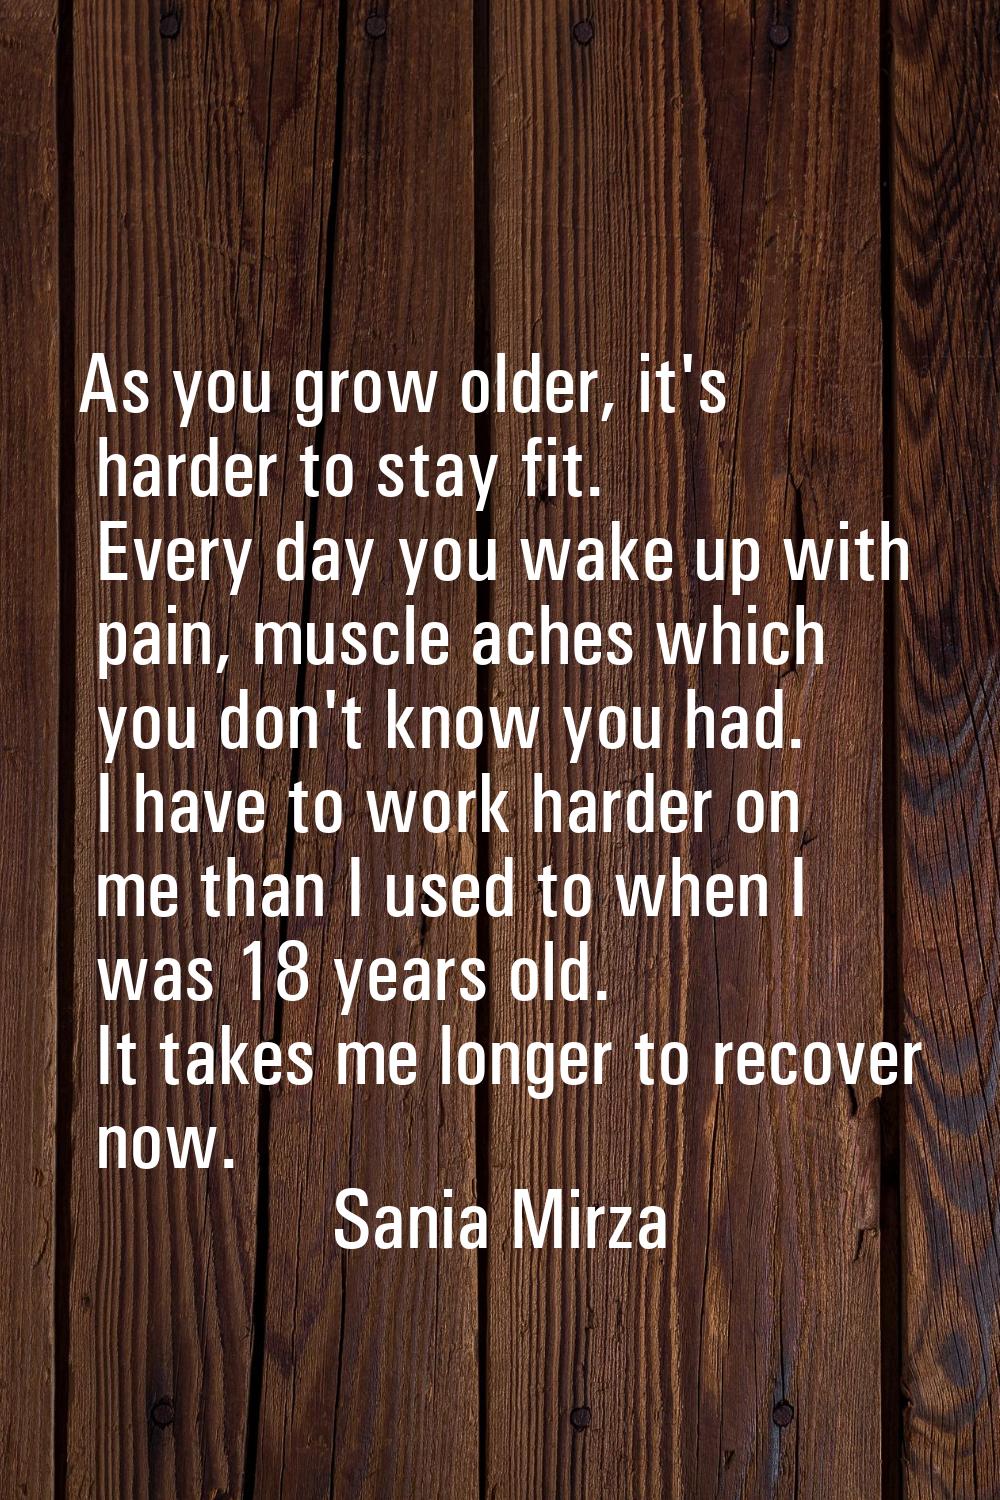 As you grow older, it's harder to stay fit. Every day you wake up with pain, muscle aches which you